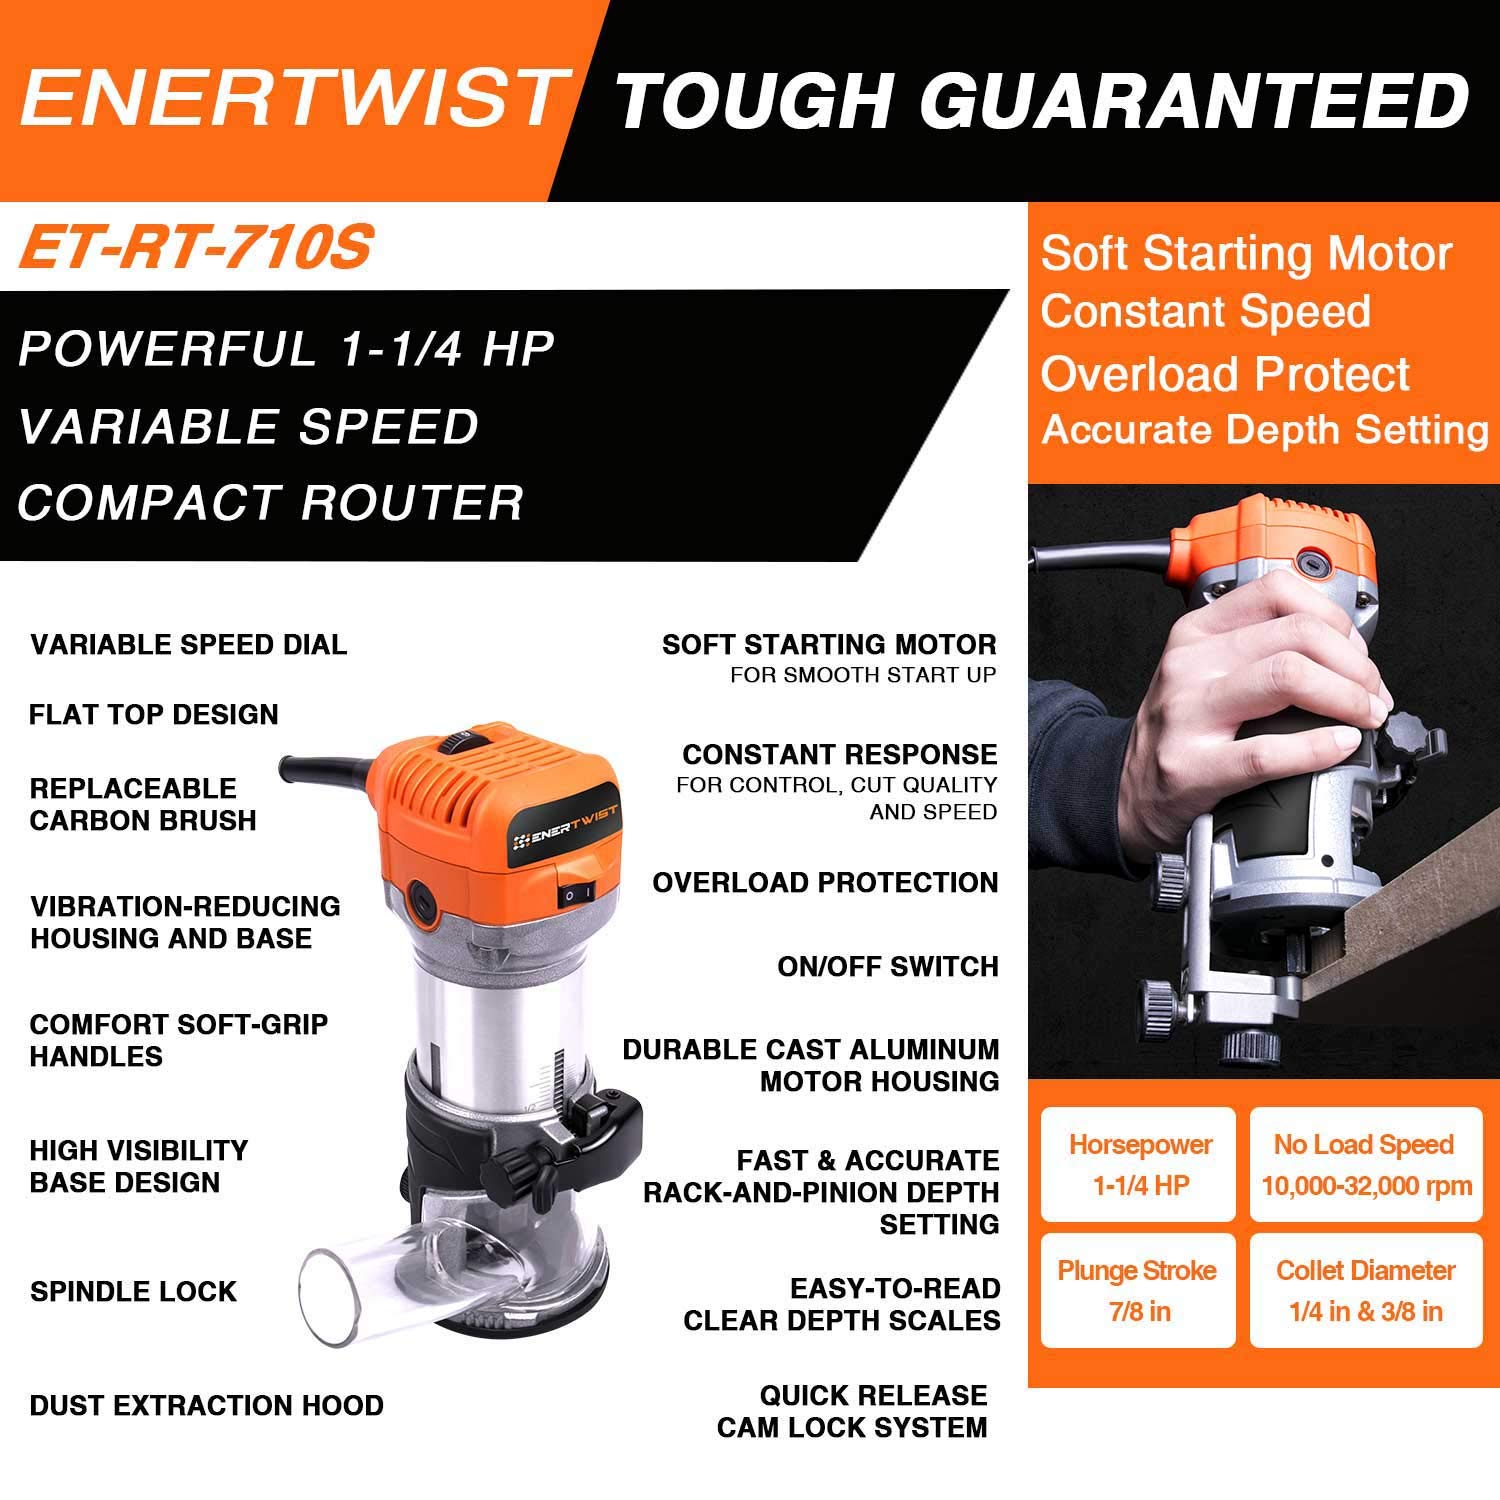 ENERTWIST Compact Router Tool, 7.0-Amp 1.25HP Soft Start Variable Speed Wood Router Kit w/Fixed Base, 1/4" & 3/8" Collets, Edge Guide, Roller Guide, Dust Hood, Replacement Brush Set, ETRT710S